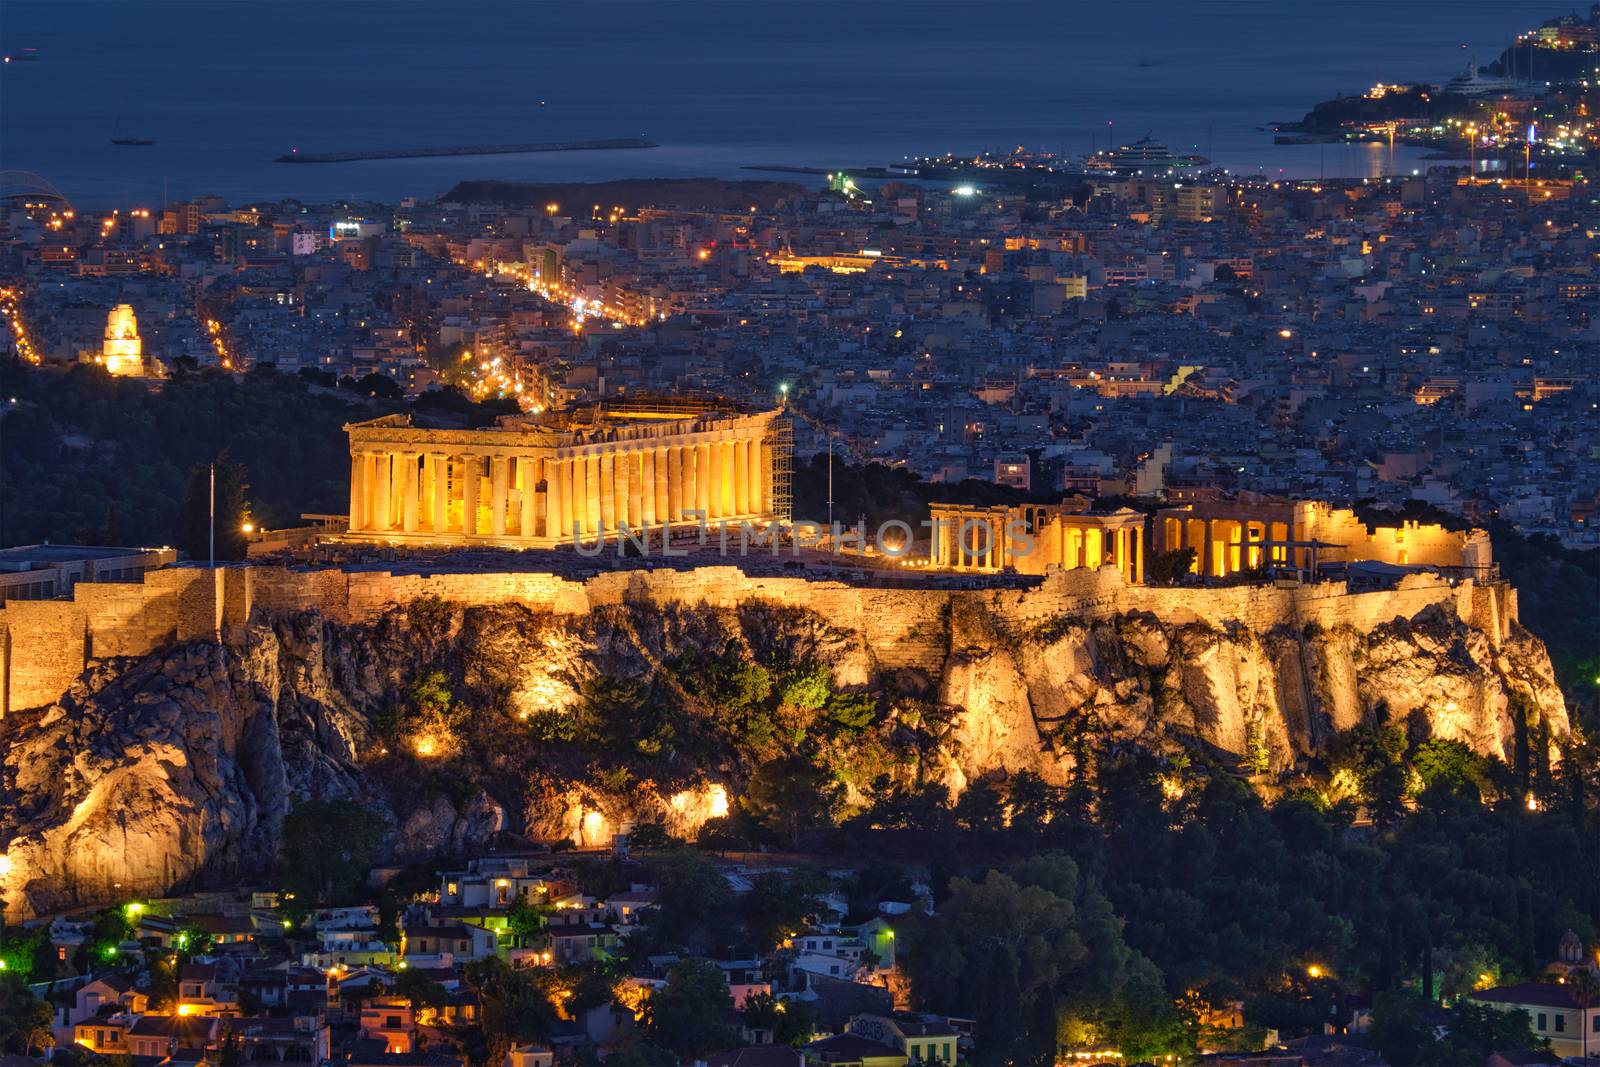 Famous greek tourist landmark - the iconic Athens view and Parthenon Temple at the Acropolis of Athens as seen from Mount Lycabettus, Athens, Greece